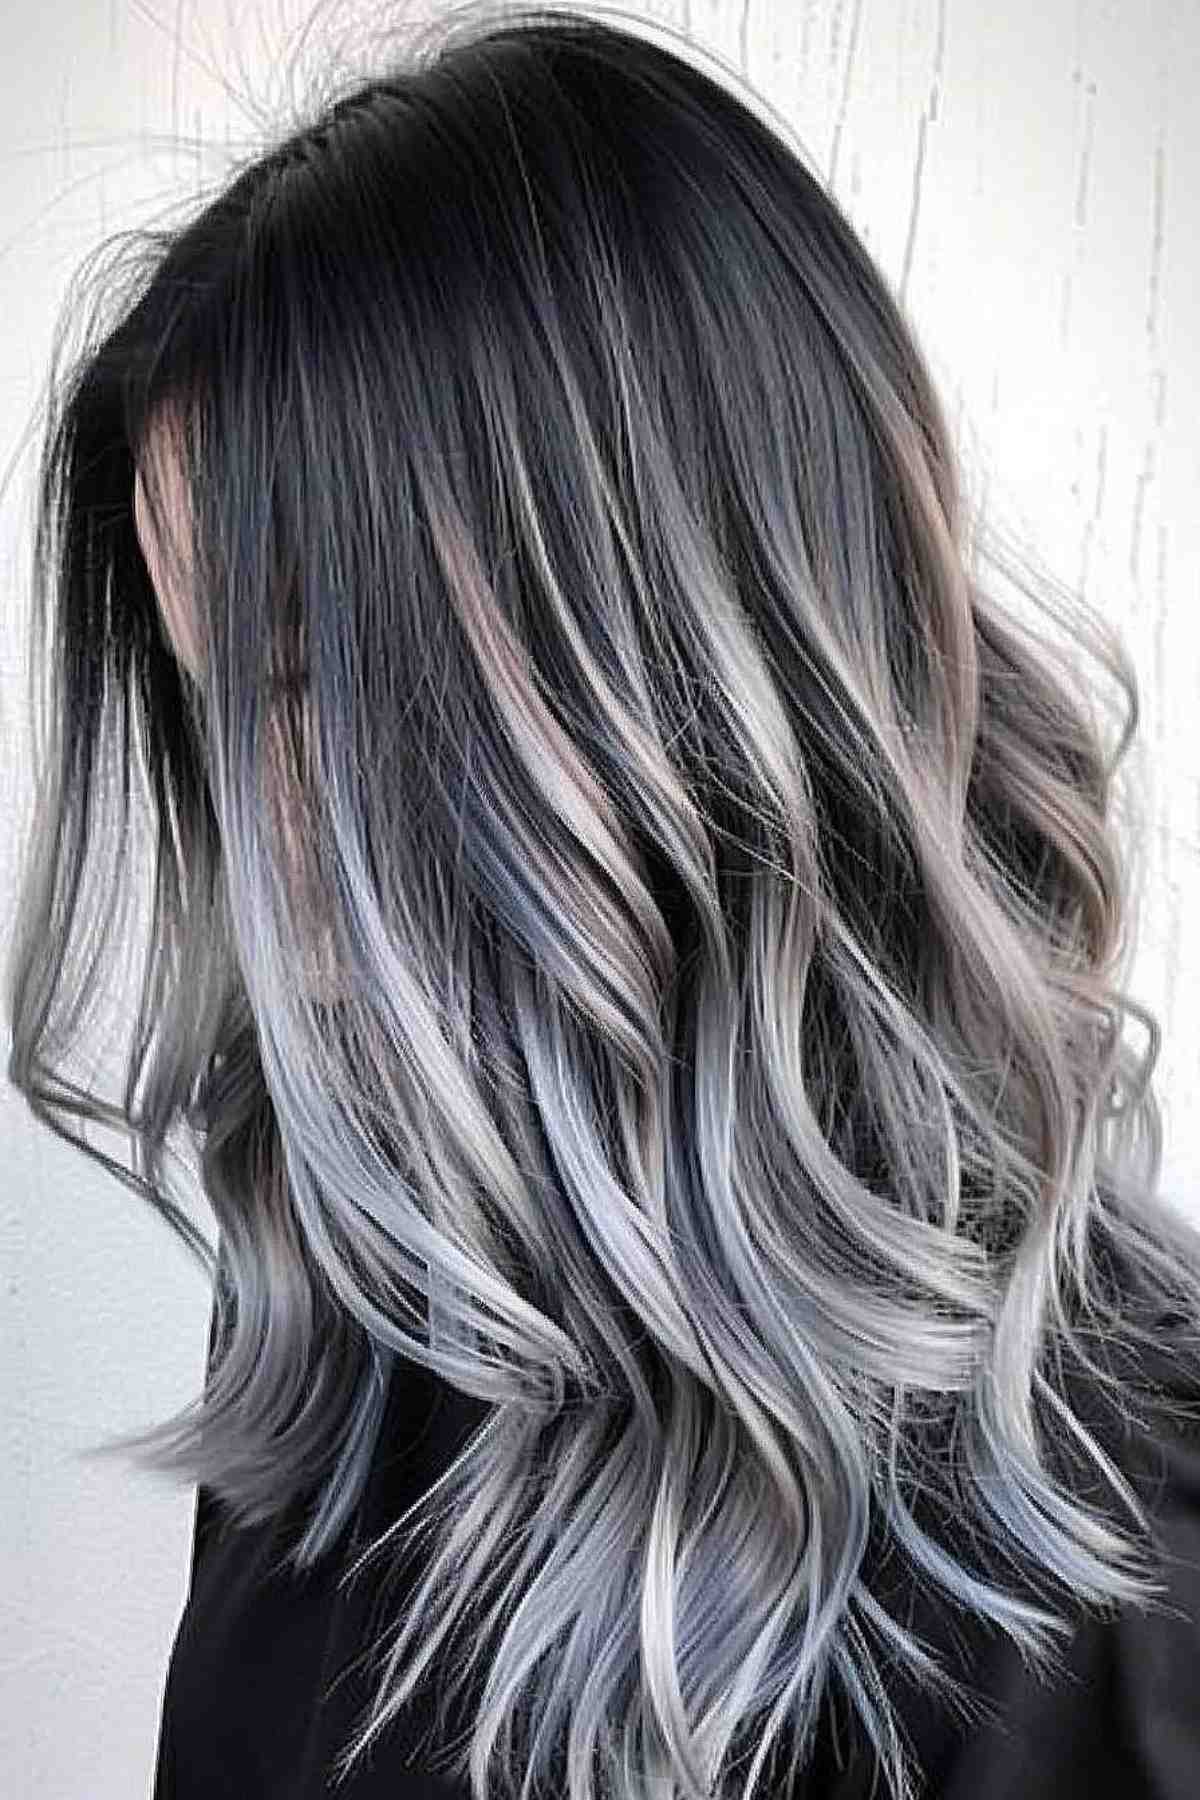 Medium-length wavy hair transitioning from black to grey with subtle pastel highlights.